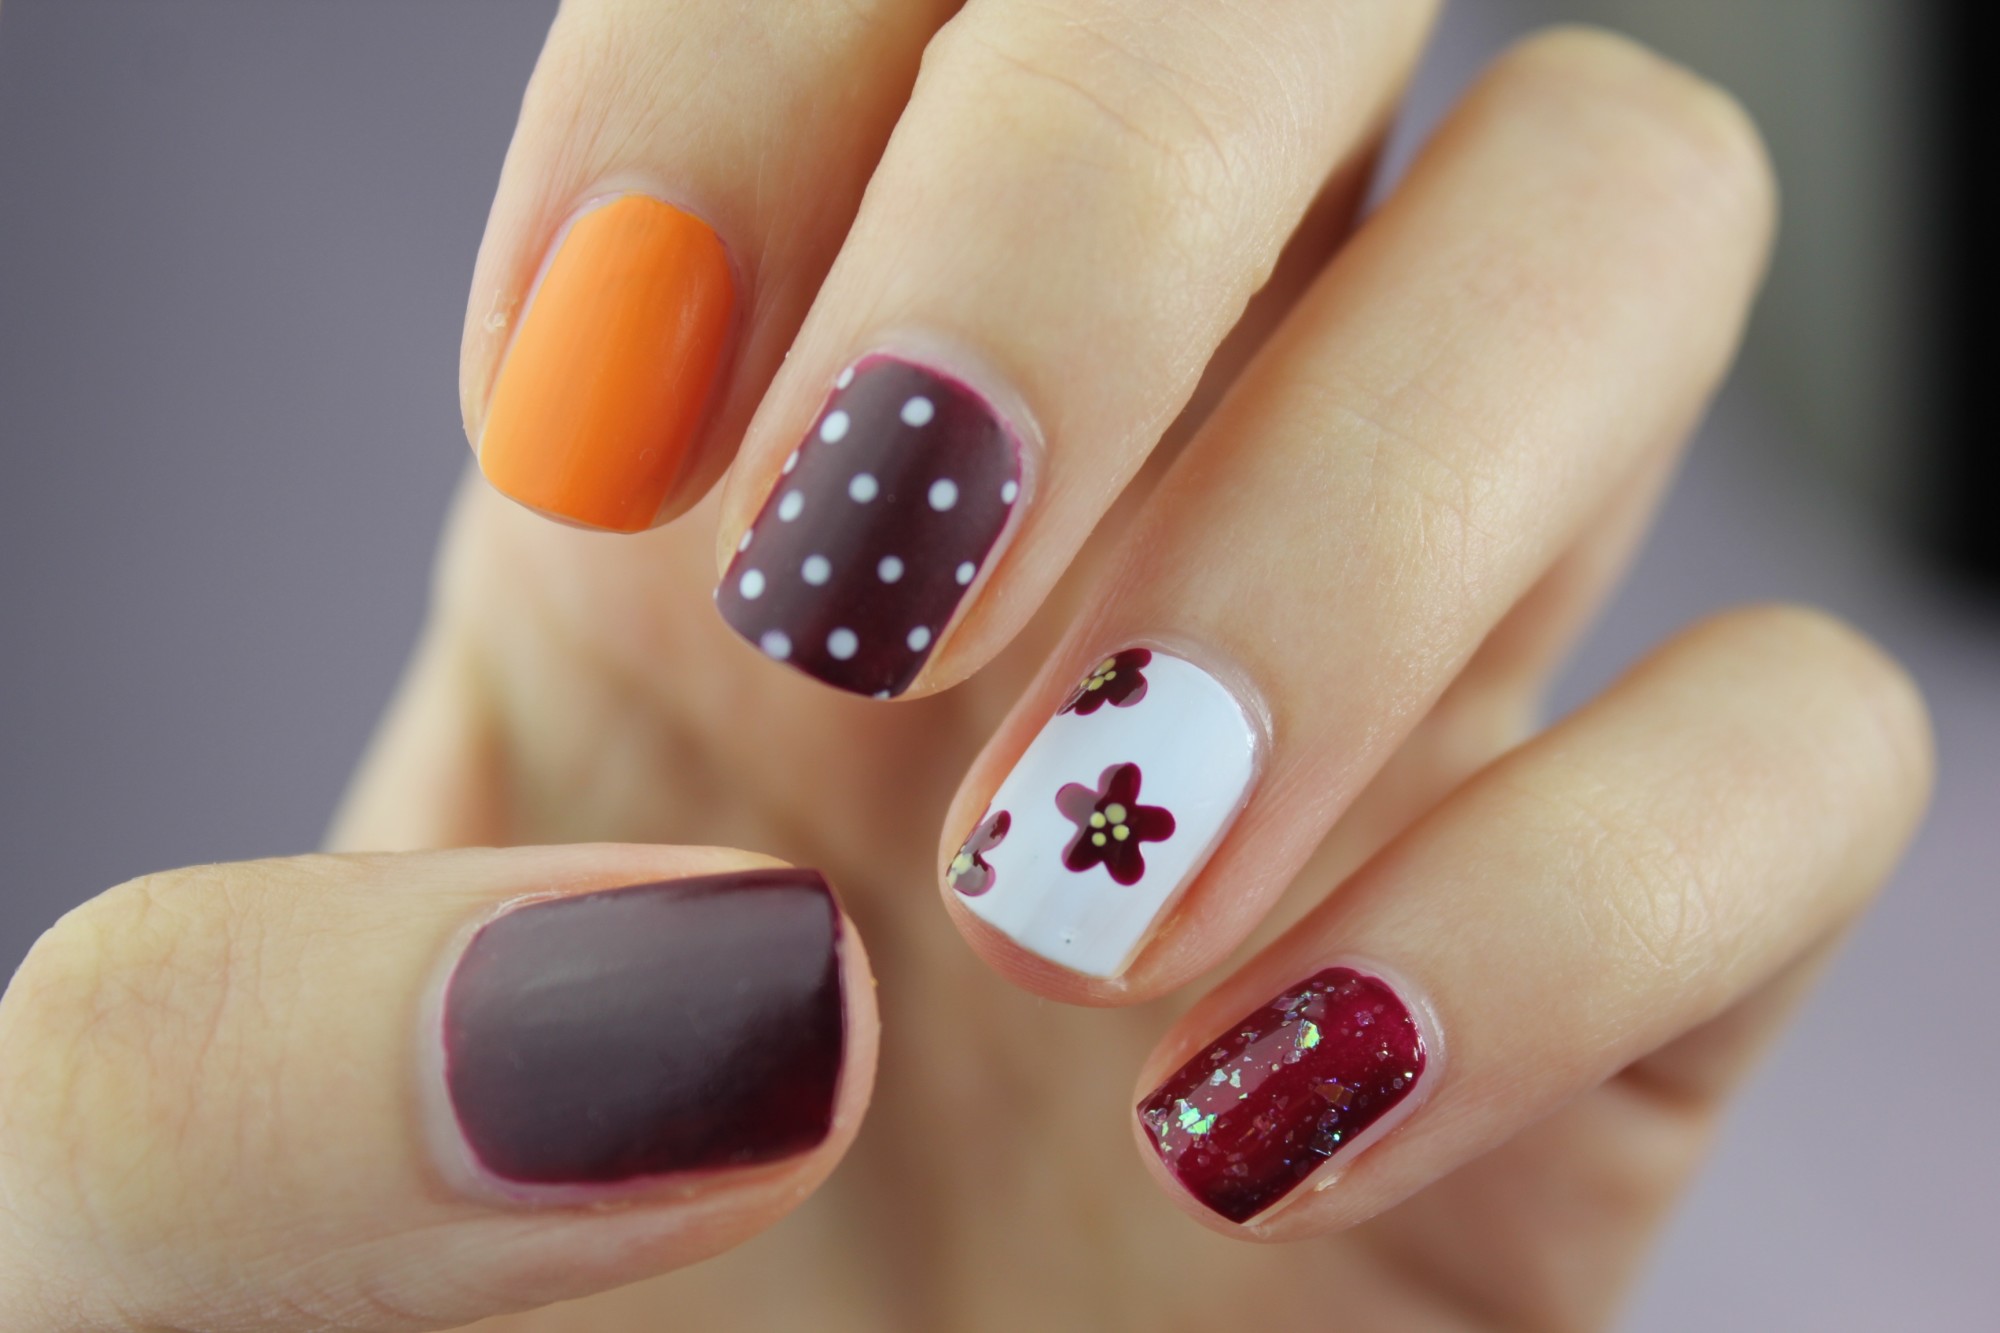 1. "Warm Toned Nail Colors for Fall in Florida" - wide 9